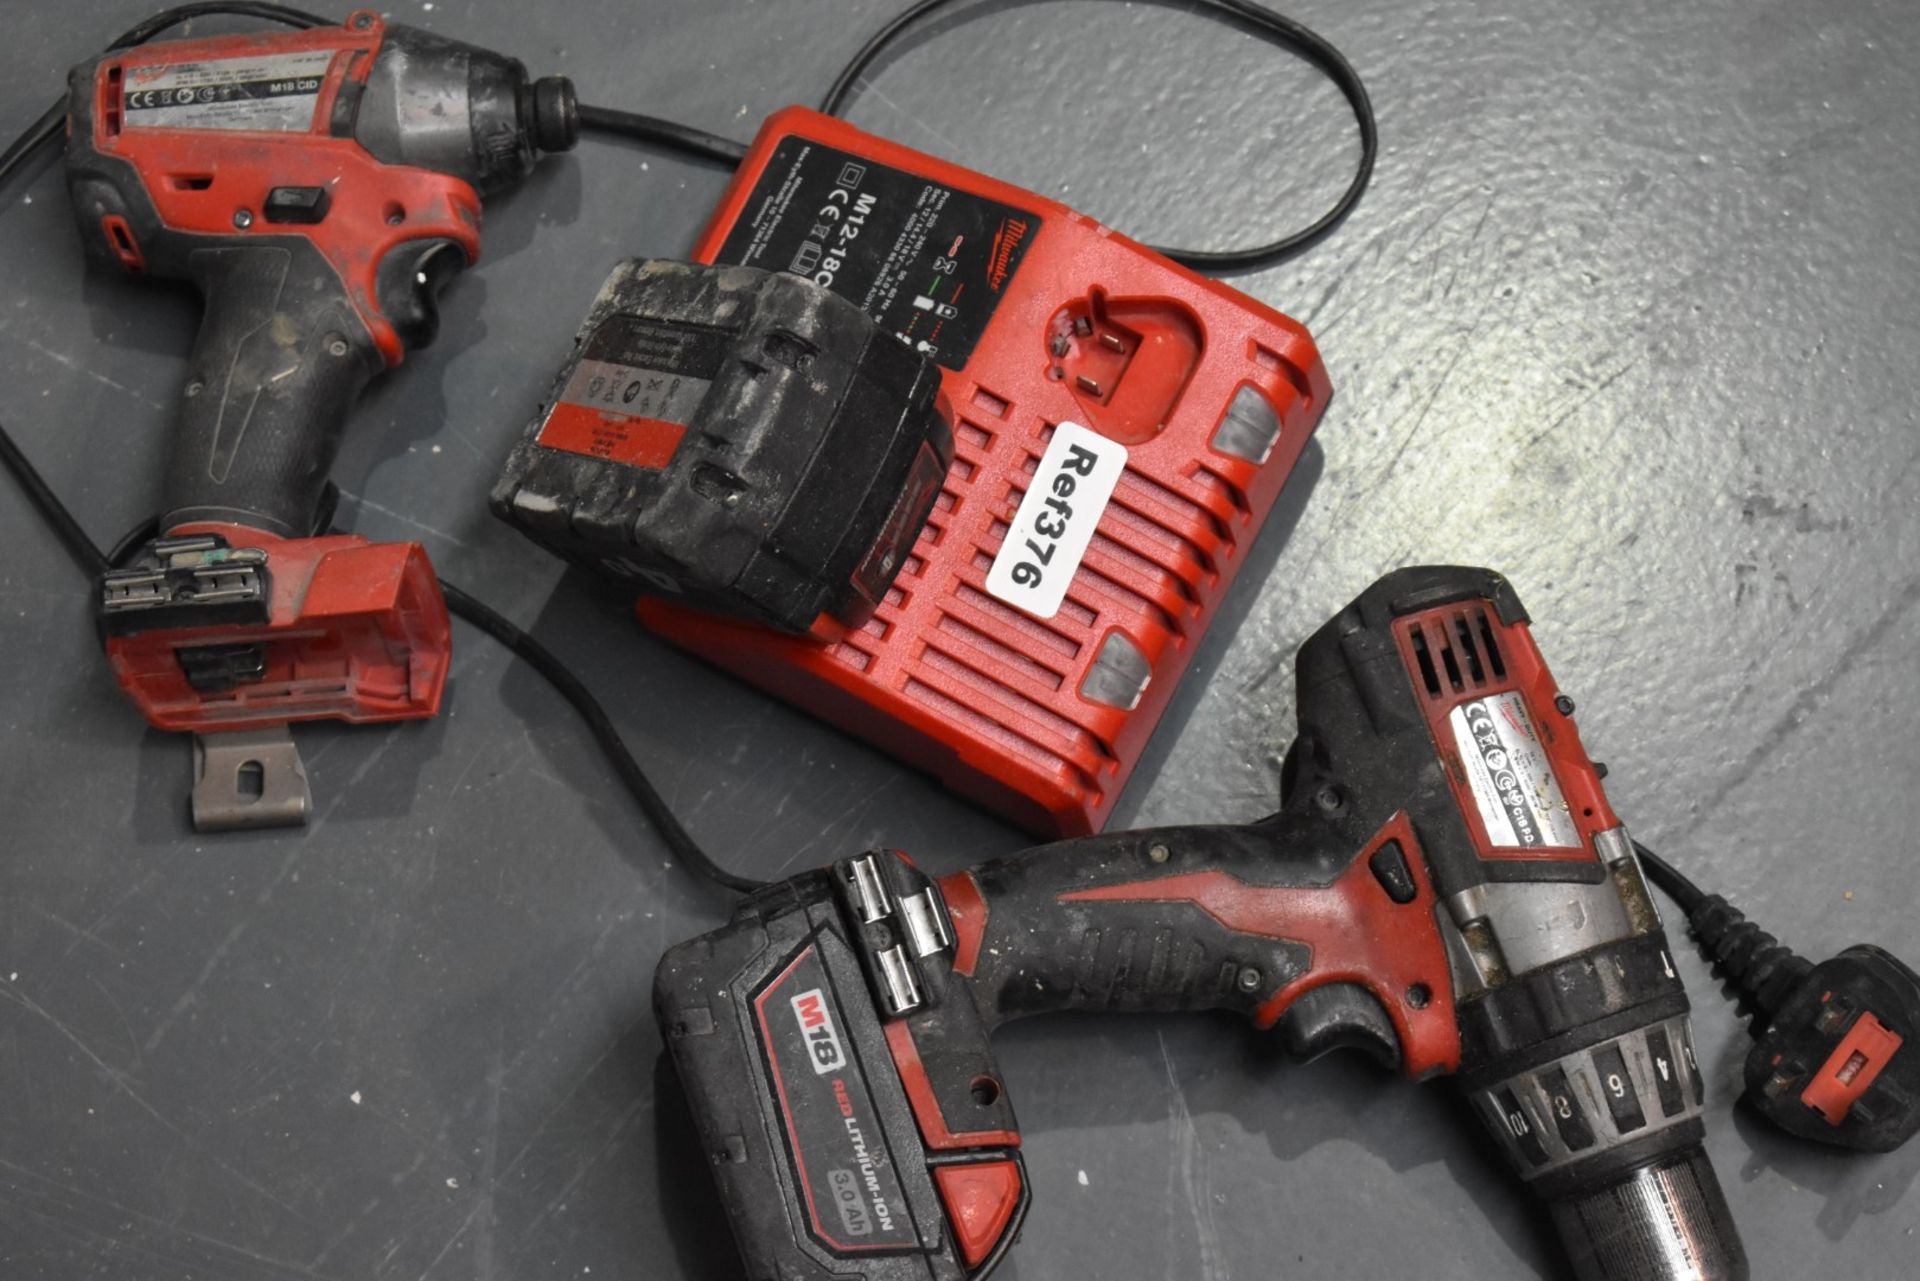 1 x Milwaukee Cordless Heavy Duty Drill Set - Includes 2 x Drills, 2 x Batteries and 1 x Charger - - Image 7 of 7